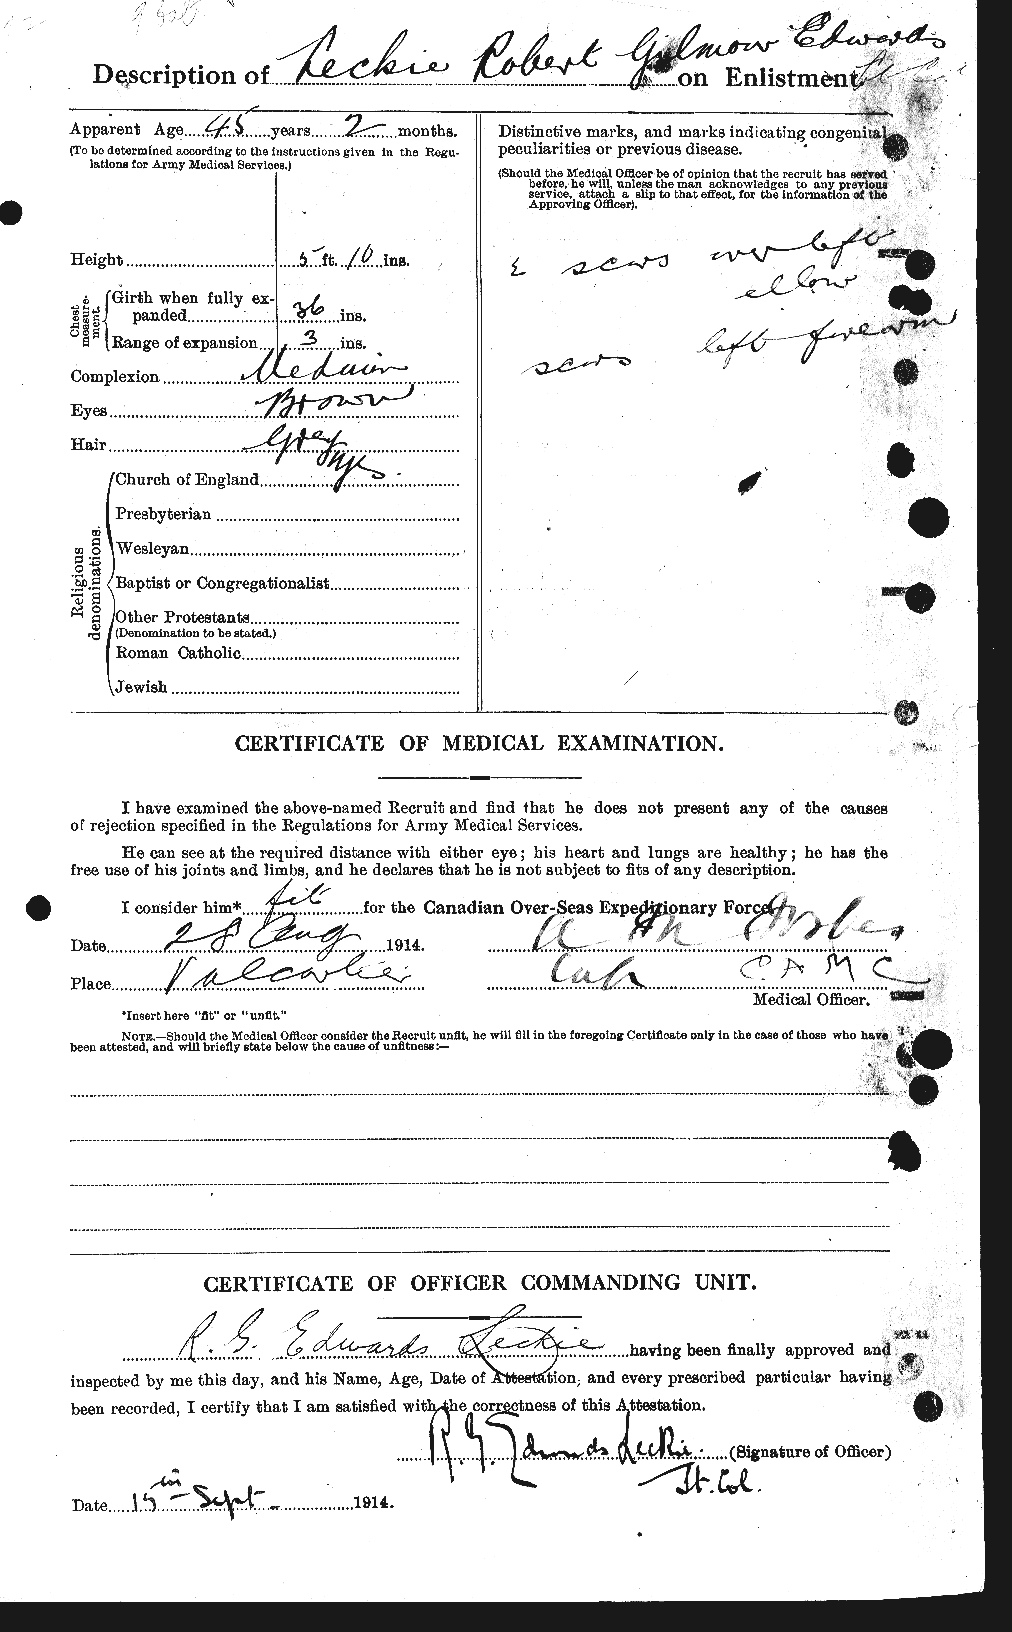 Personnel Records of the First World War - CEF 453611b